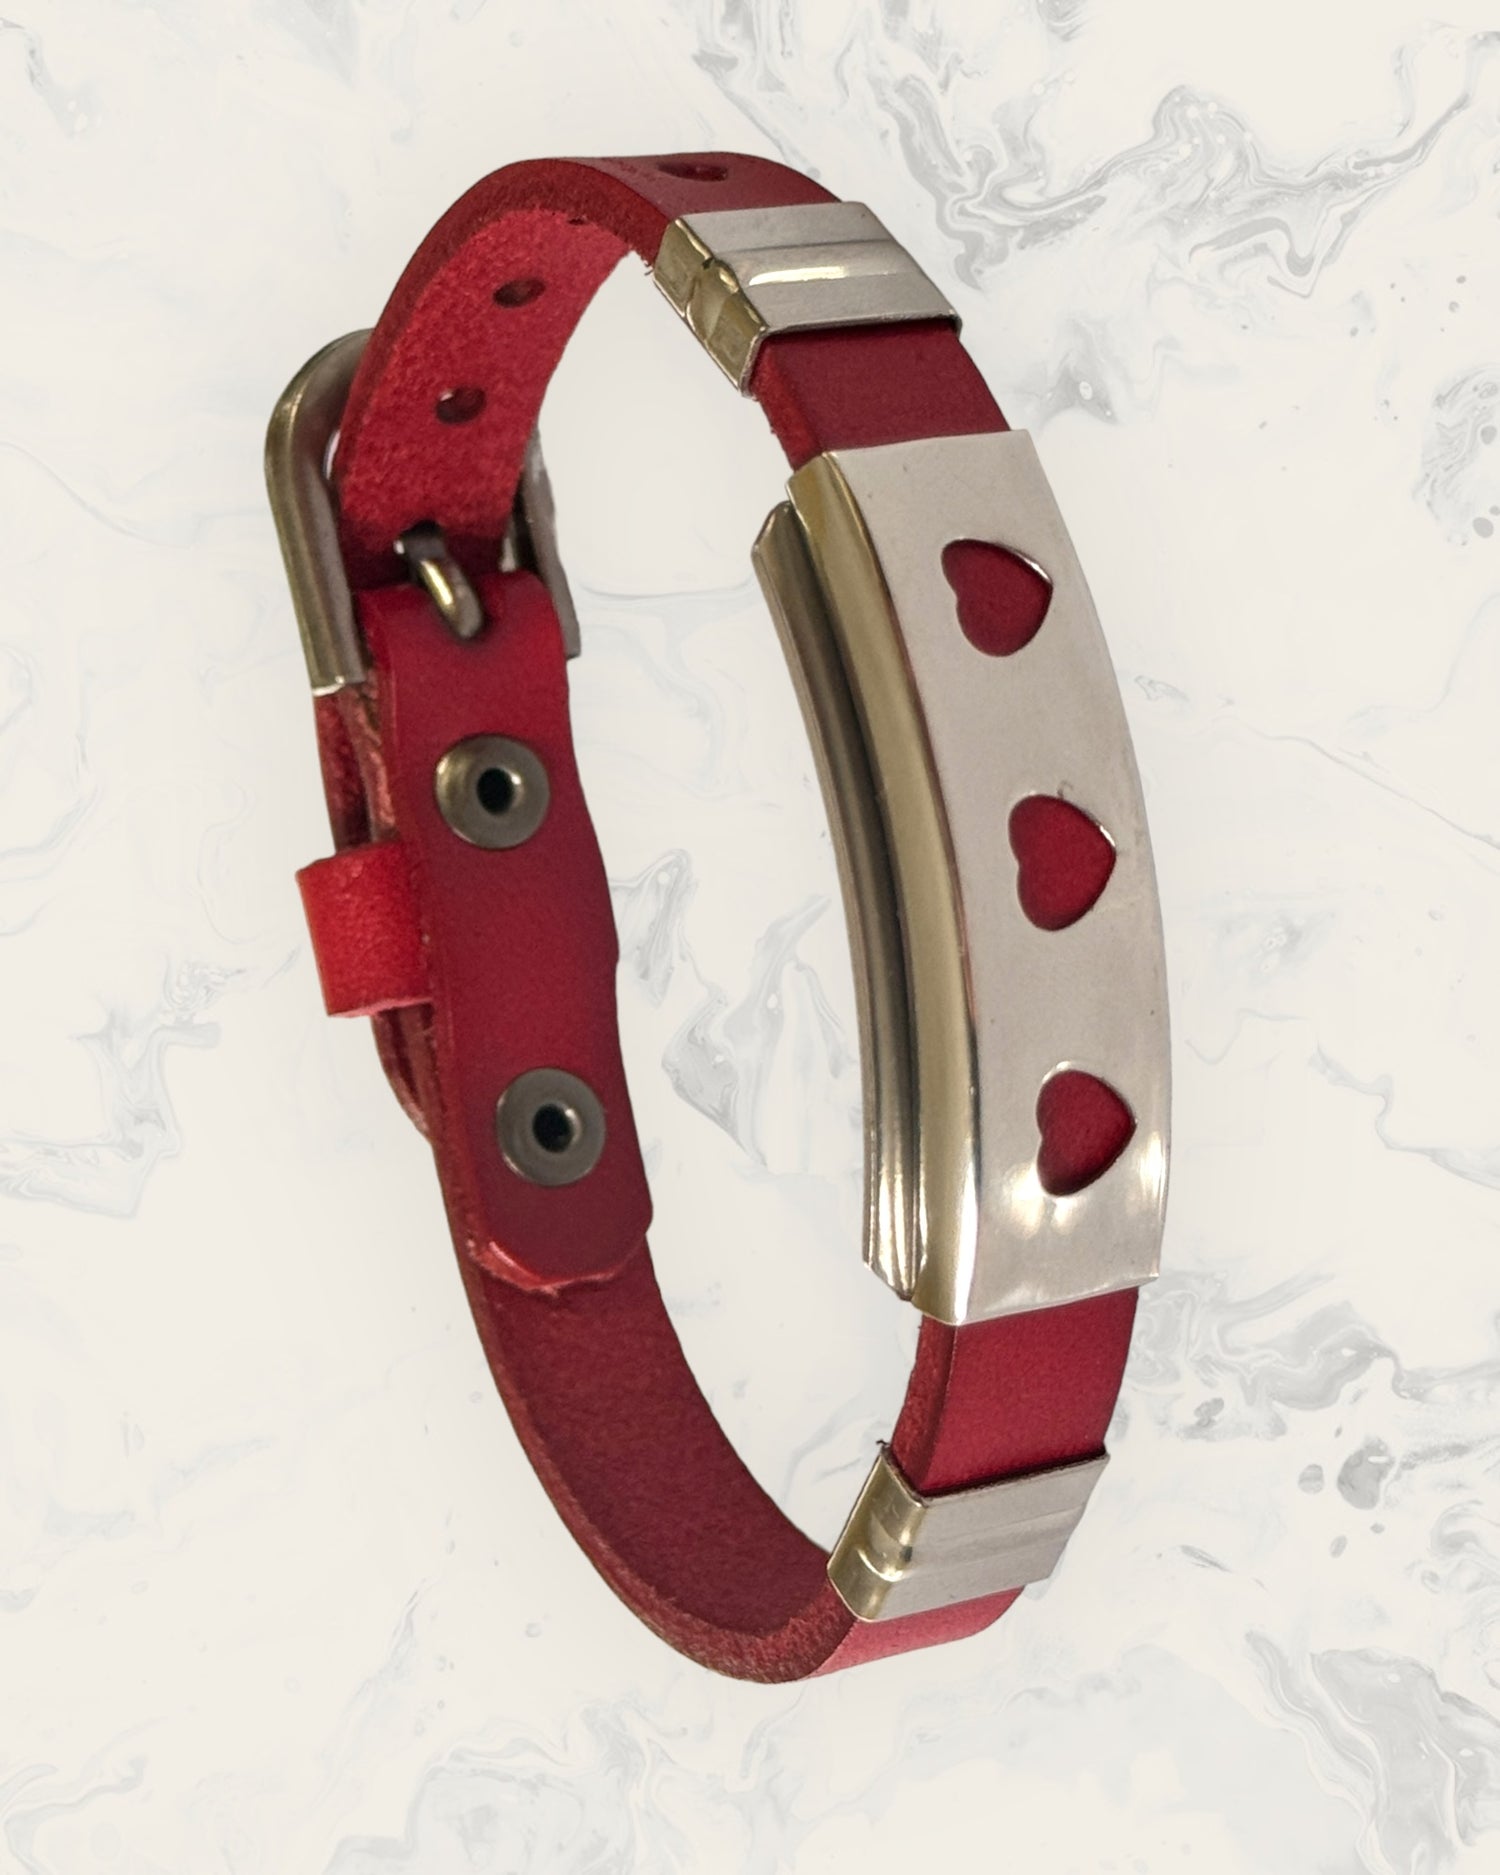 Natural Pain Relief and EMF Protection Bracelet Leather Band Color Red with Three Hearts design on a silver metal slider